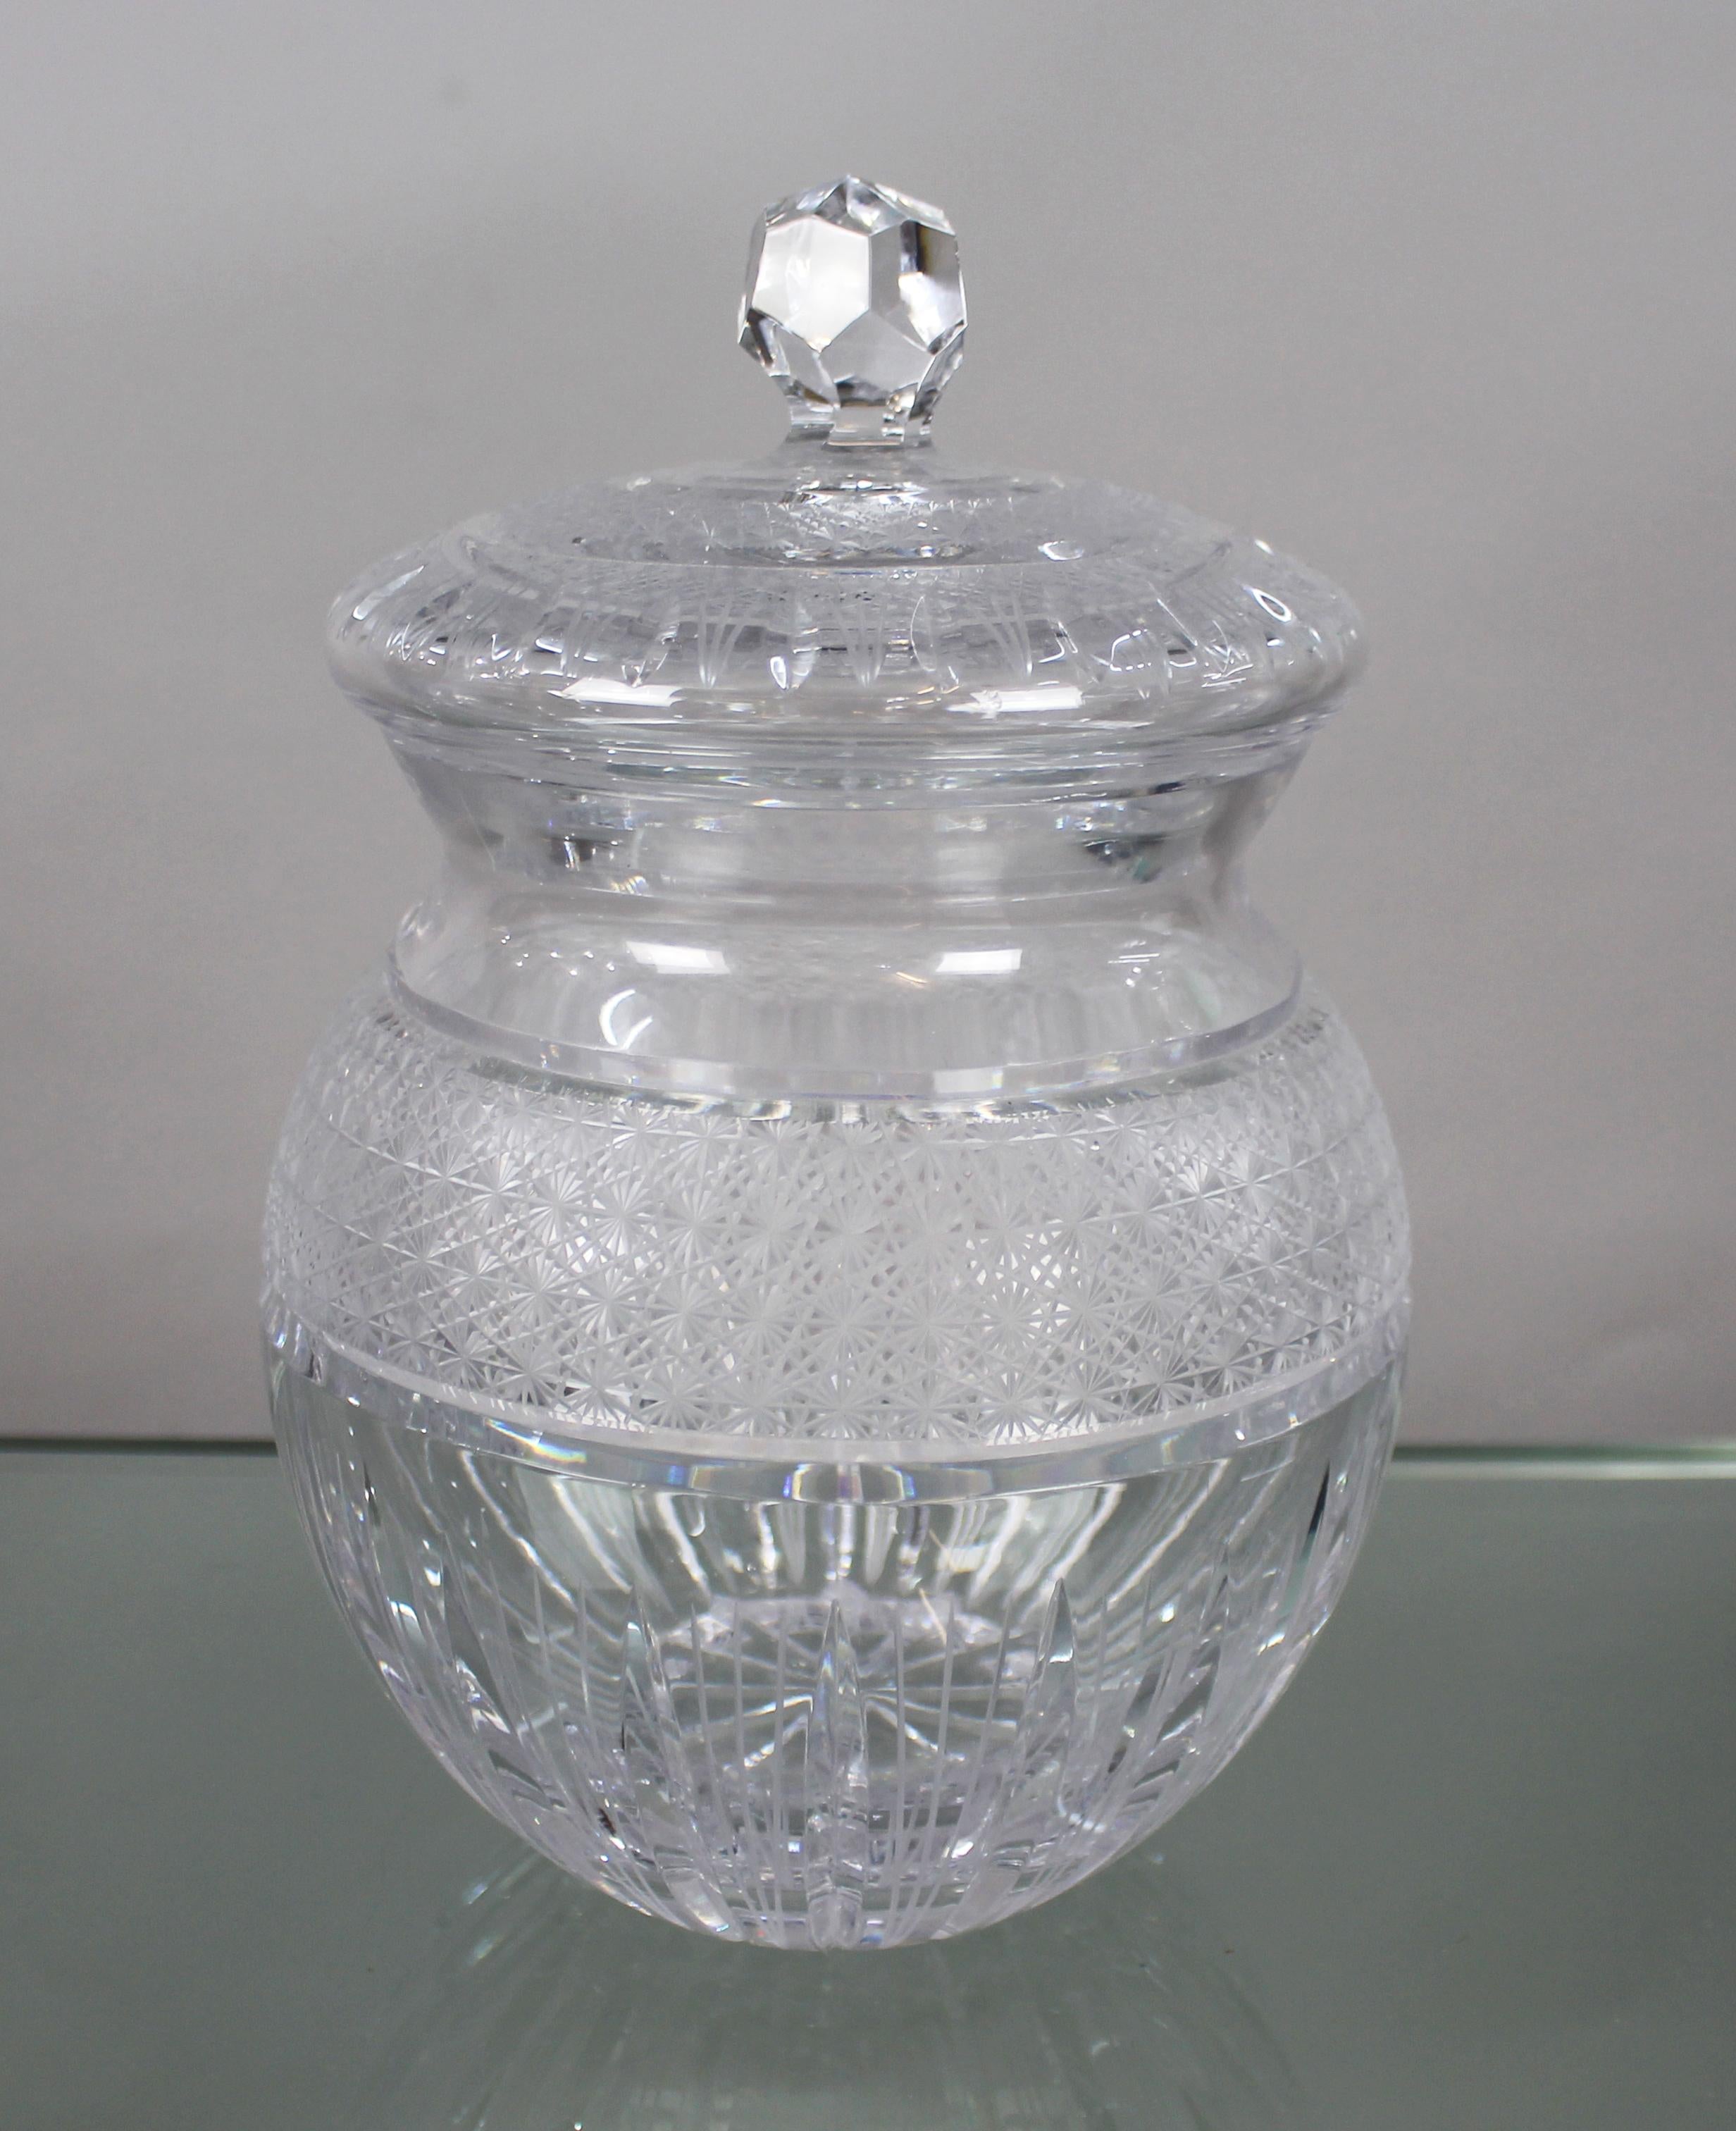 Mid 20th c. Bohemian Cut Glass Lidded Biscuit Jar


Lovely quality vintage cut glass lidded jar. Finely cut.

Measures 16 x 16 x 25 (height) cm

Very good condition; no chips, cracks or repairs